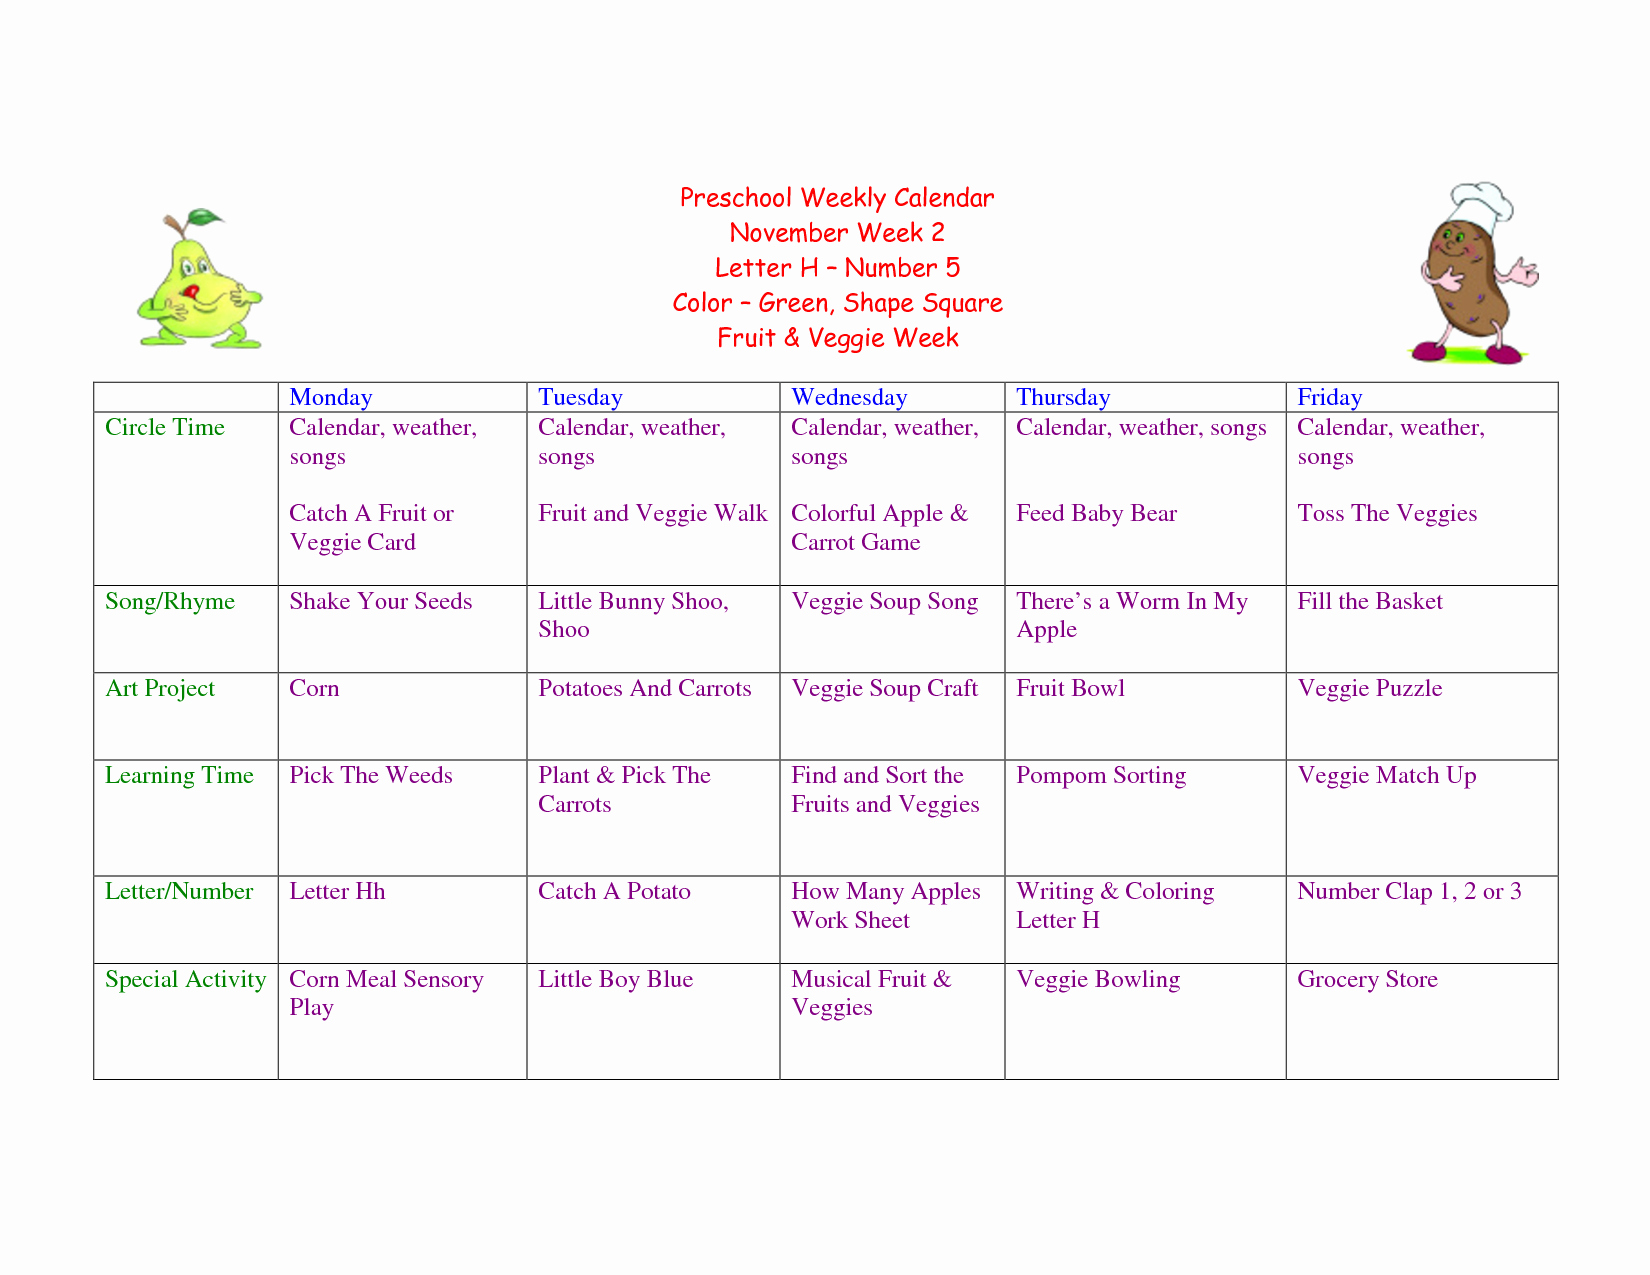 Weekly Lesson Plan for toddlers